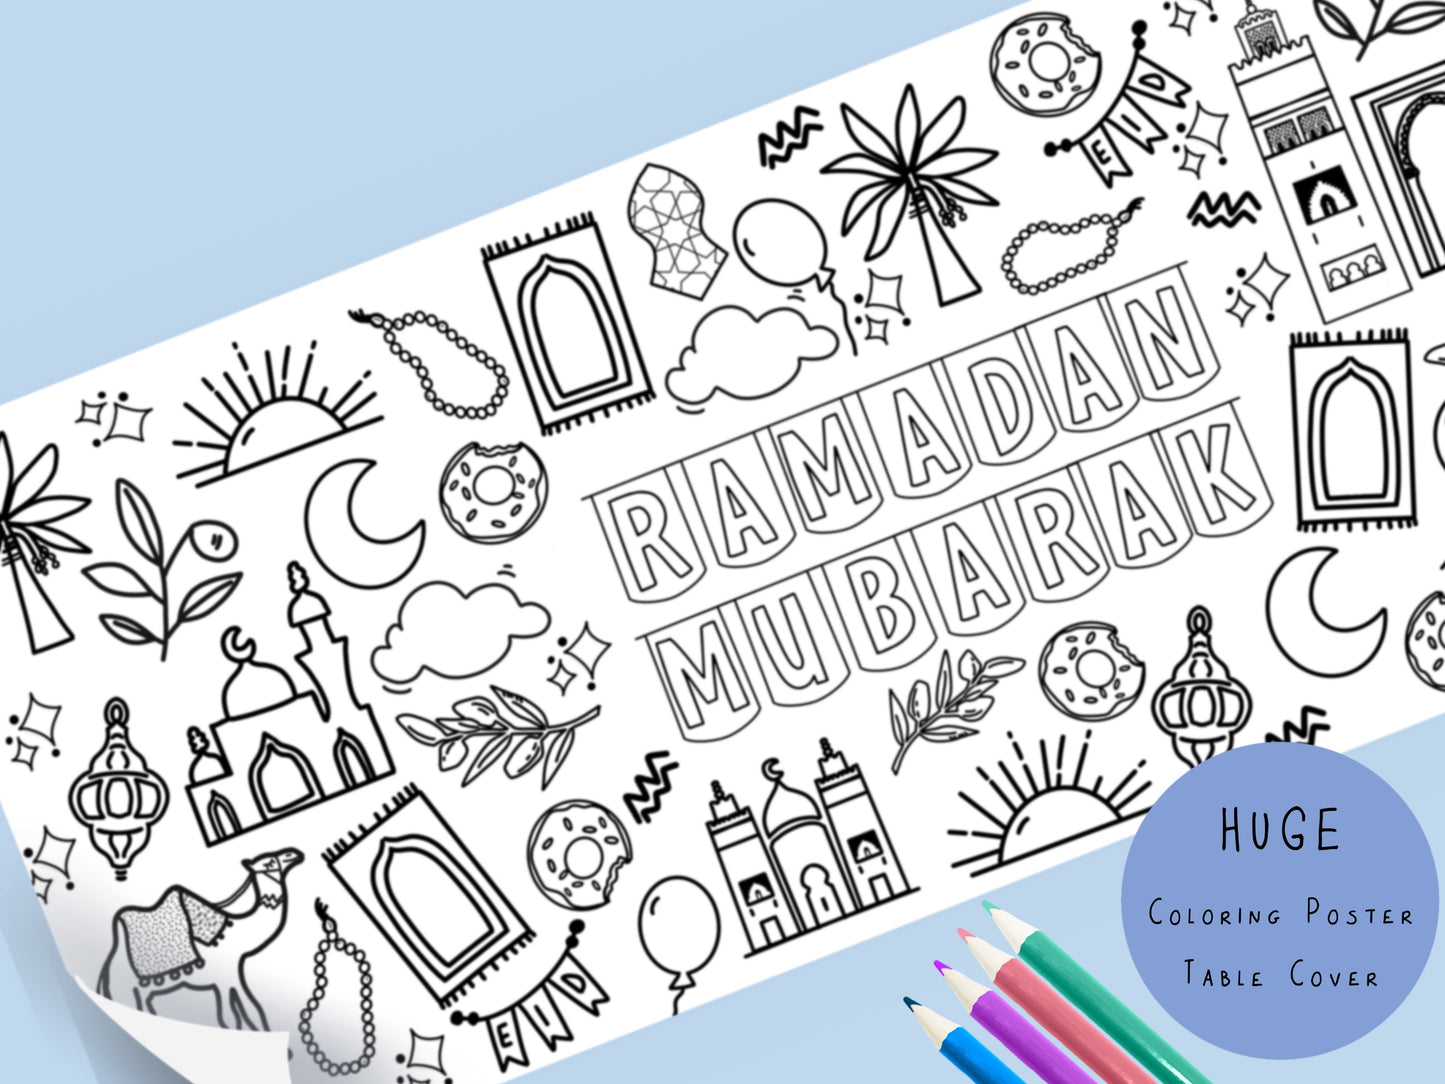 Huge Ramadan & Eid Coloring Poster | Coloring Table Cover | Free Shipping